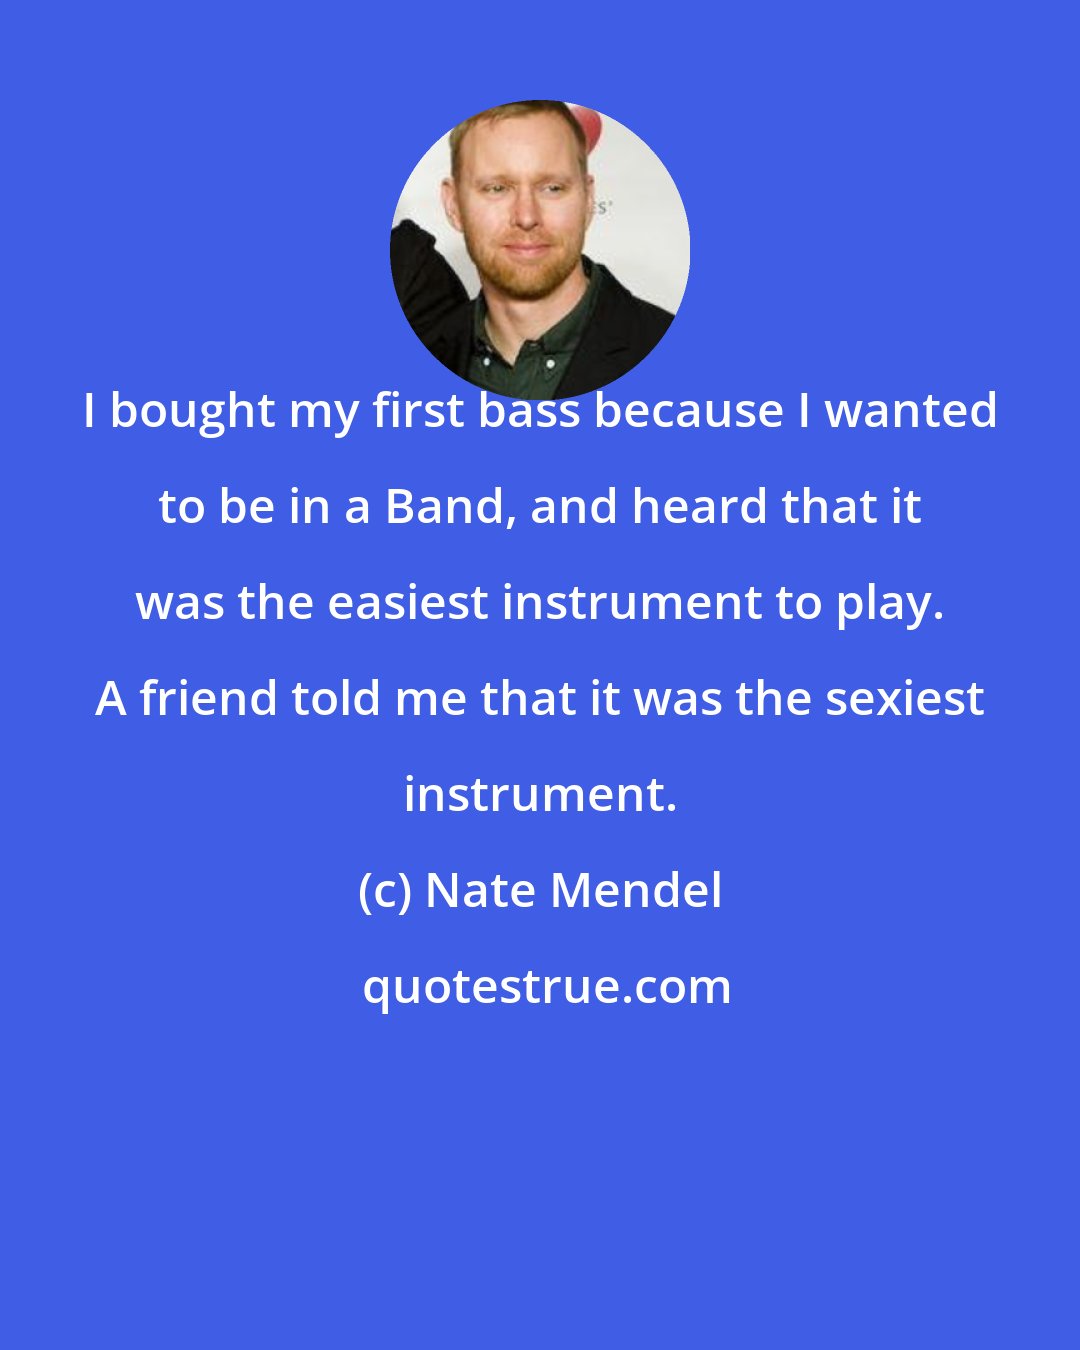 Nate Mendel: I bought my first bass because I wanted to be in a Band, and heard that it was the easiest instrument to play. A friend told me that it was the sexiest instrument.